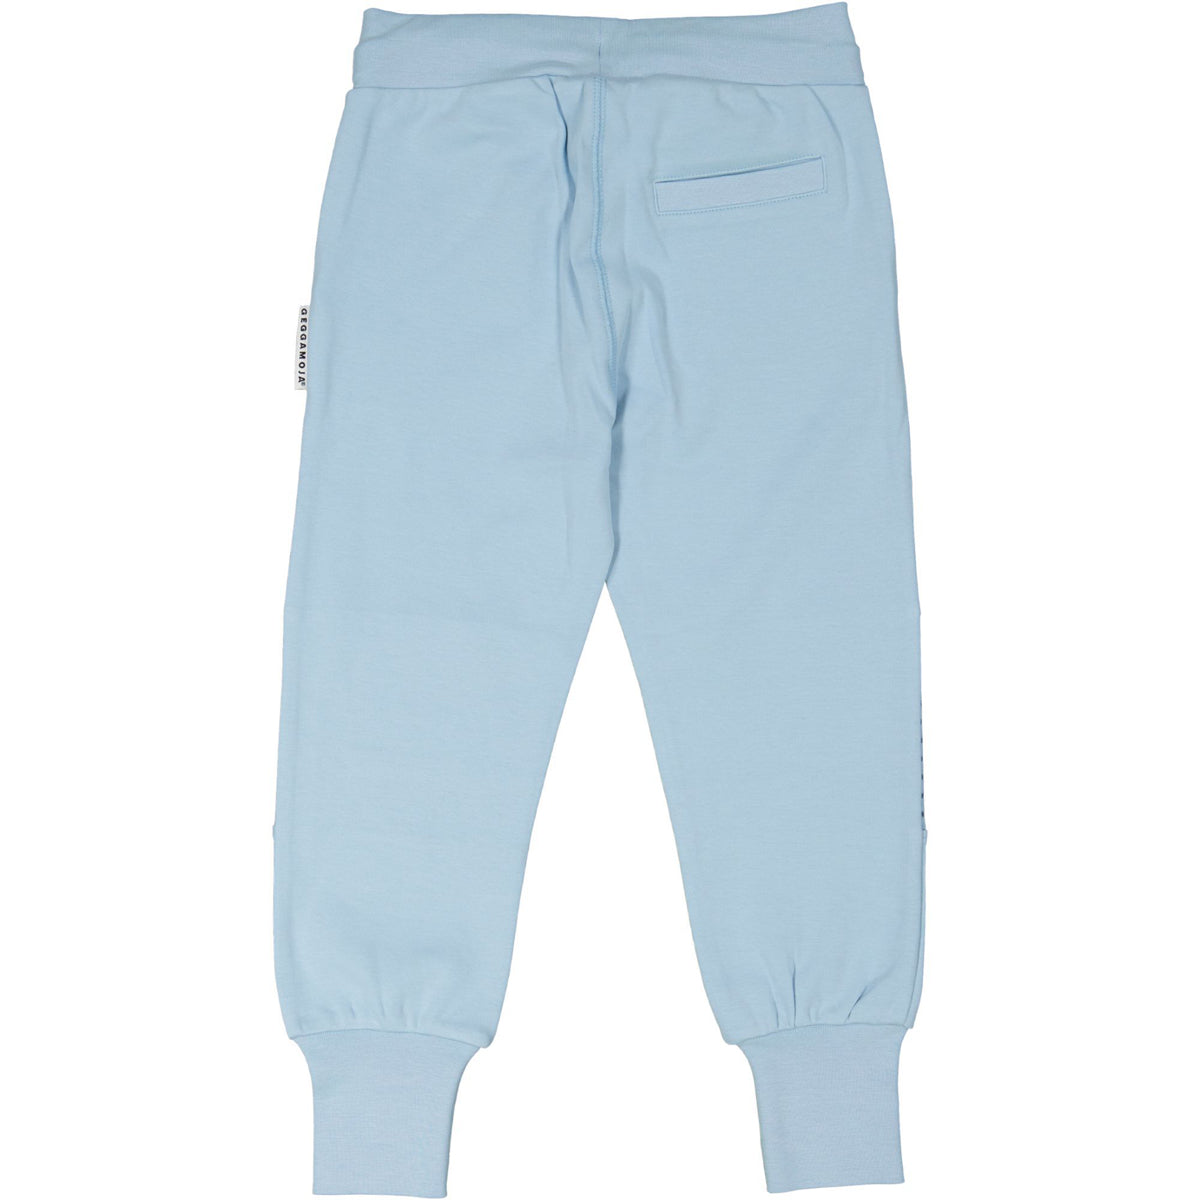 Geggamoja® Organic Cotton Baby/Kids Comfy Pants - SOLID LIGHT BLUE with STRIPED KNEES